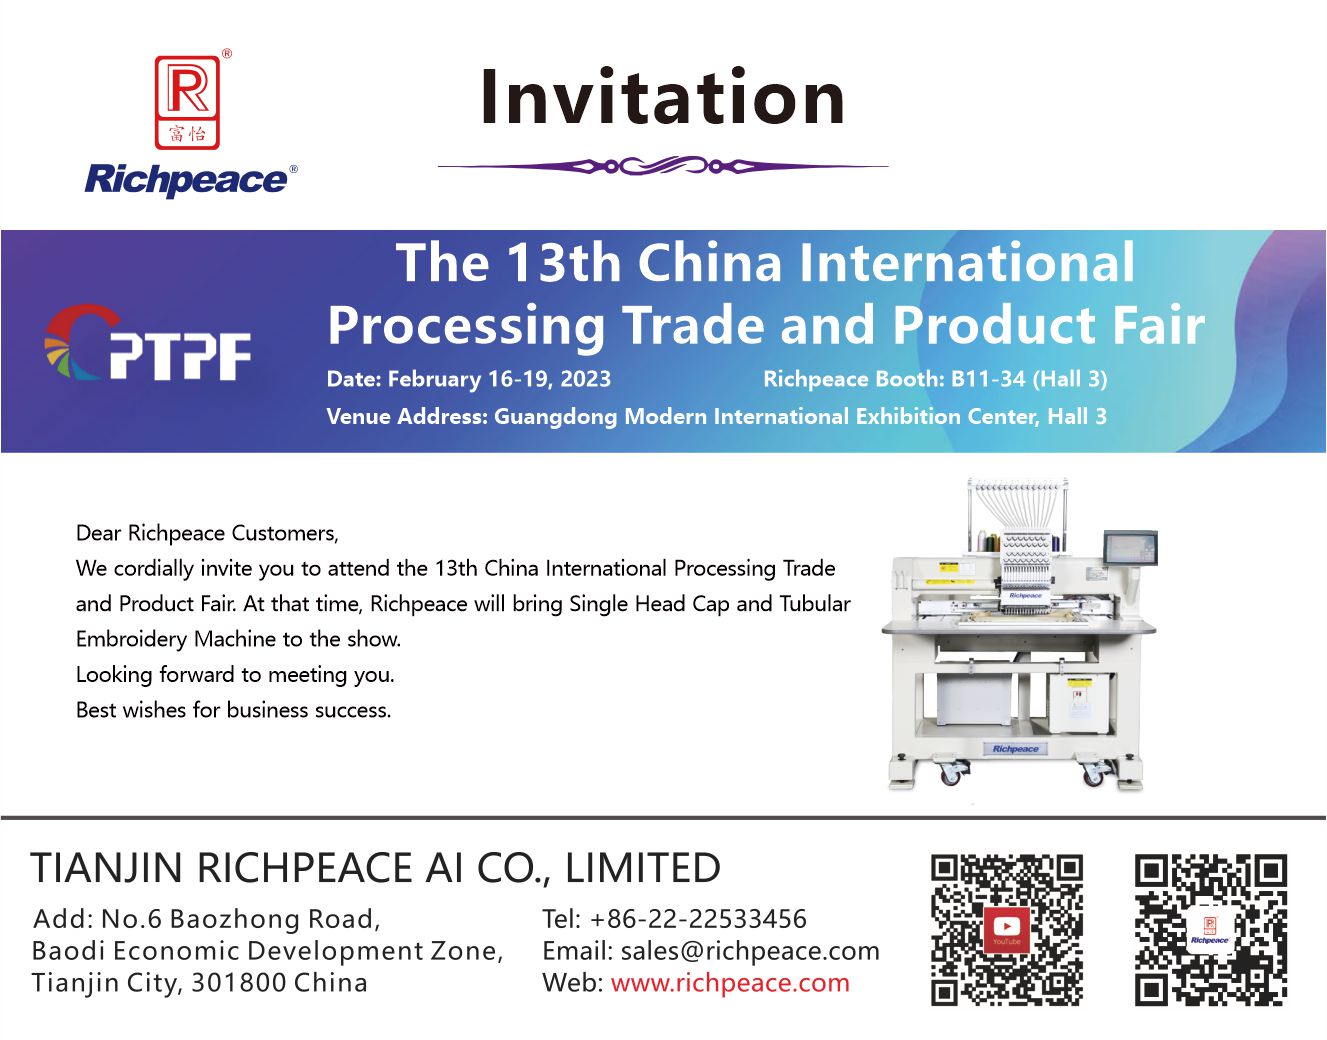 The 13th China Processing Trade Products Fair